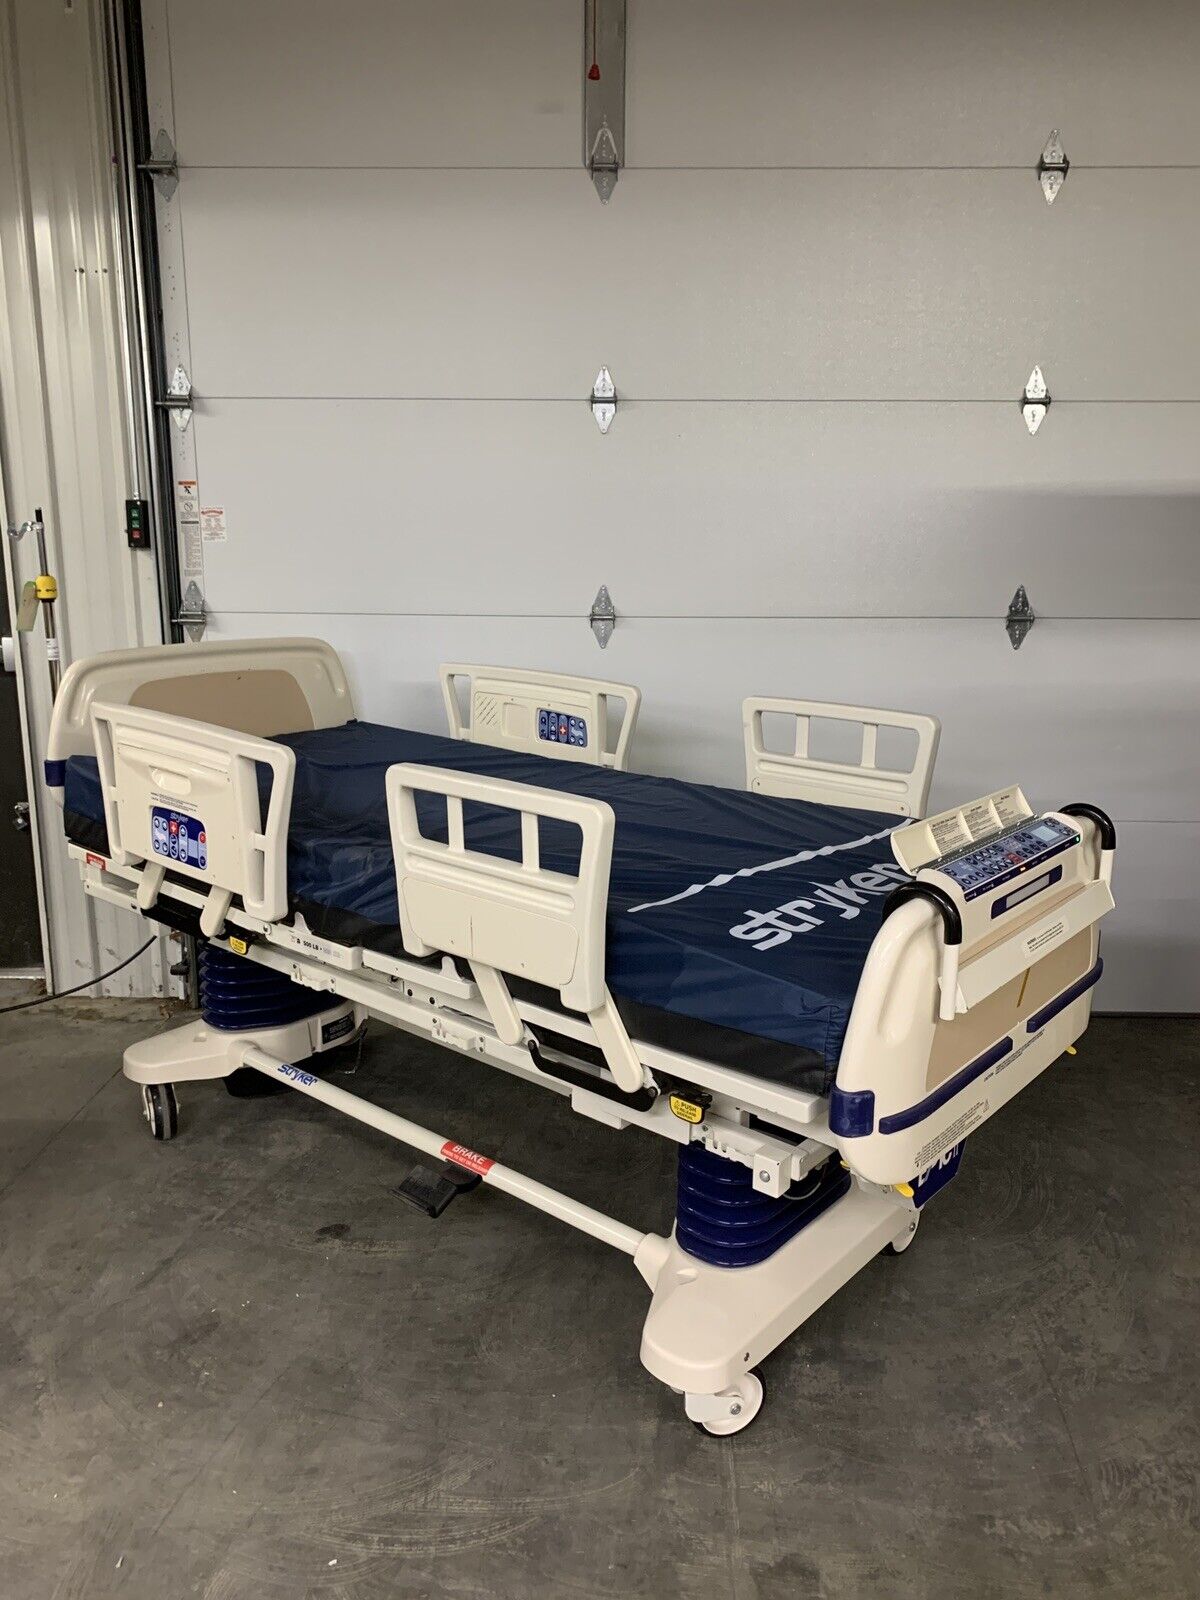 Stryker Epic Bed 2030 Critical Care Hospital Bed Comfort Gel Semi Bad Hydraulic